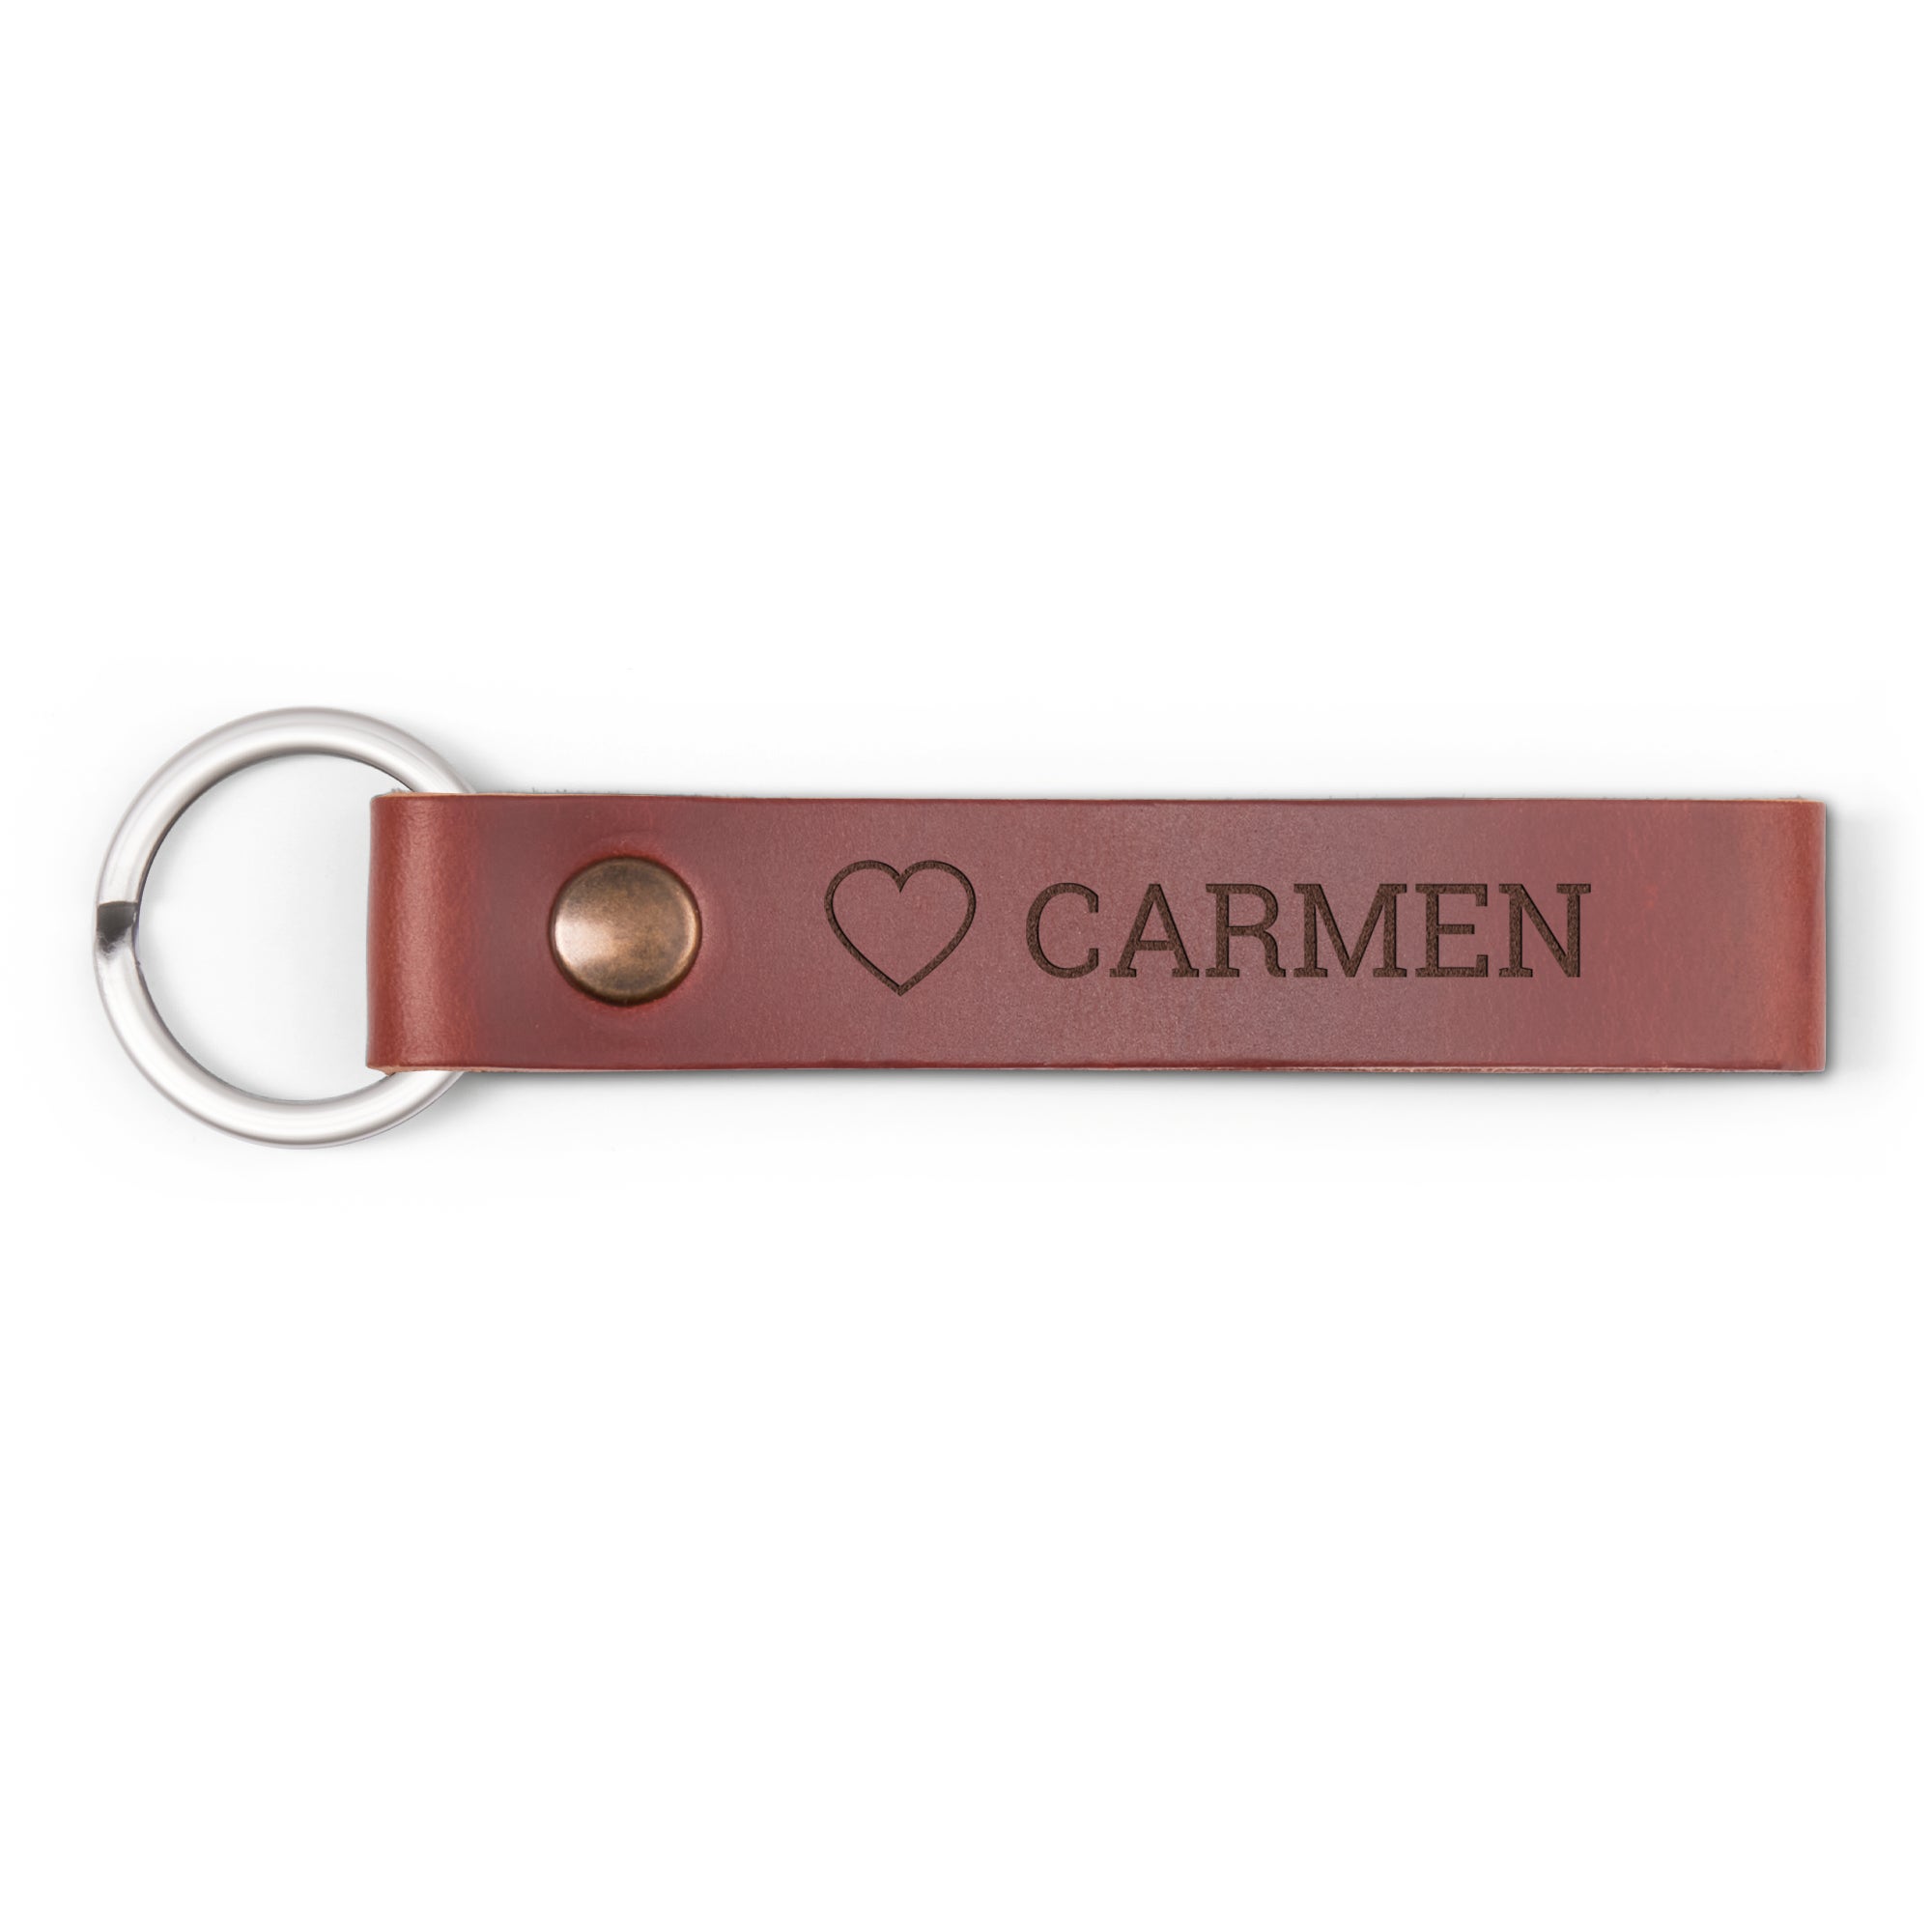 Personalised key ring - Leather - Brown - Engraved - Double-sided